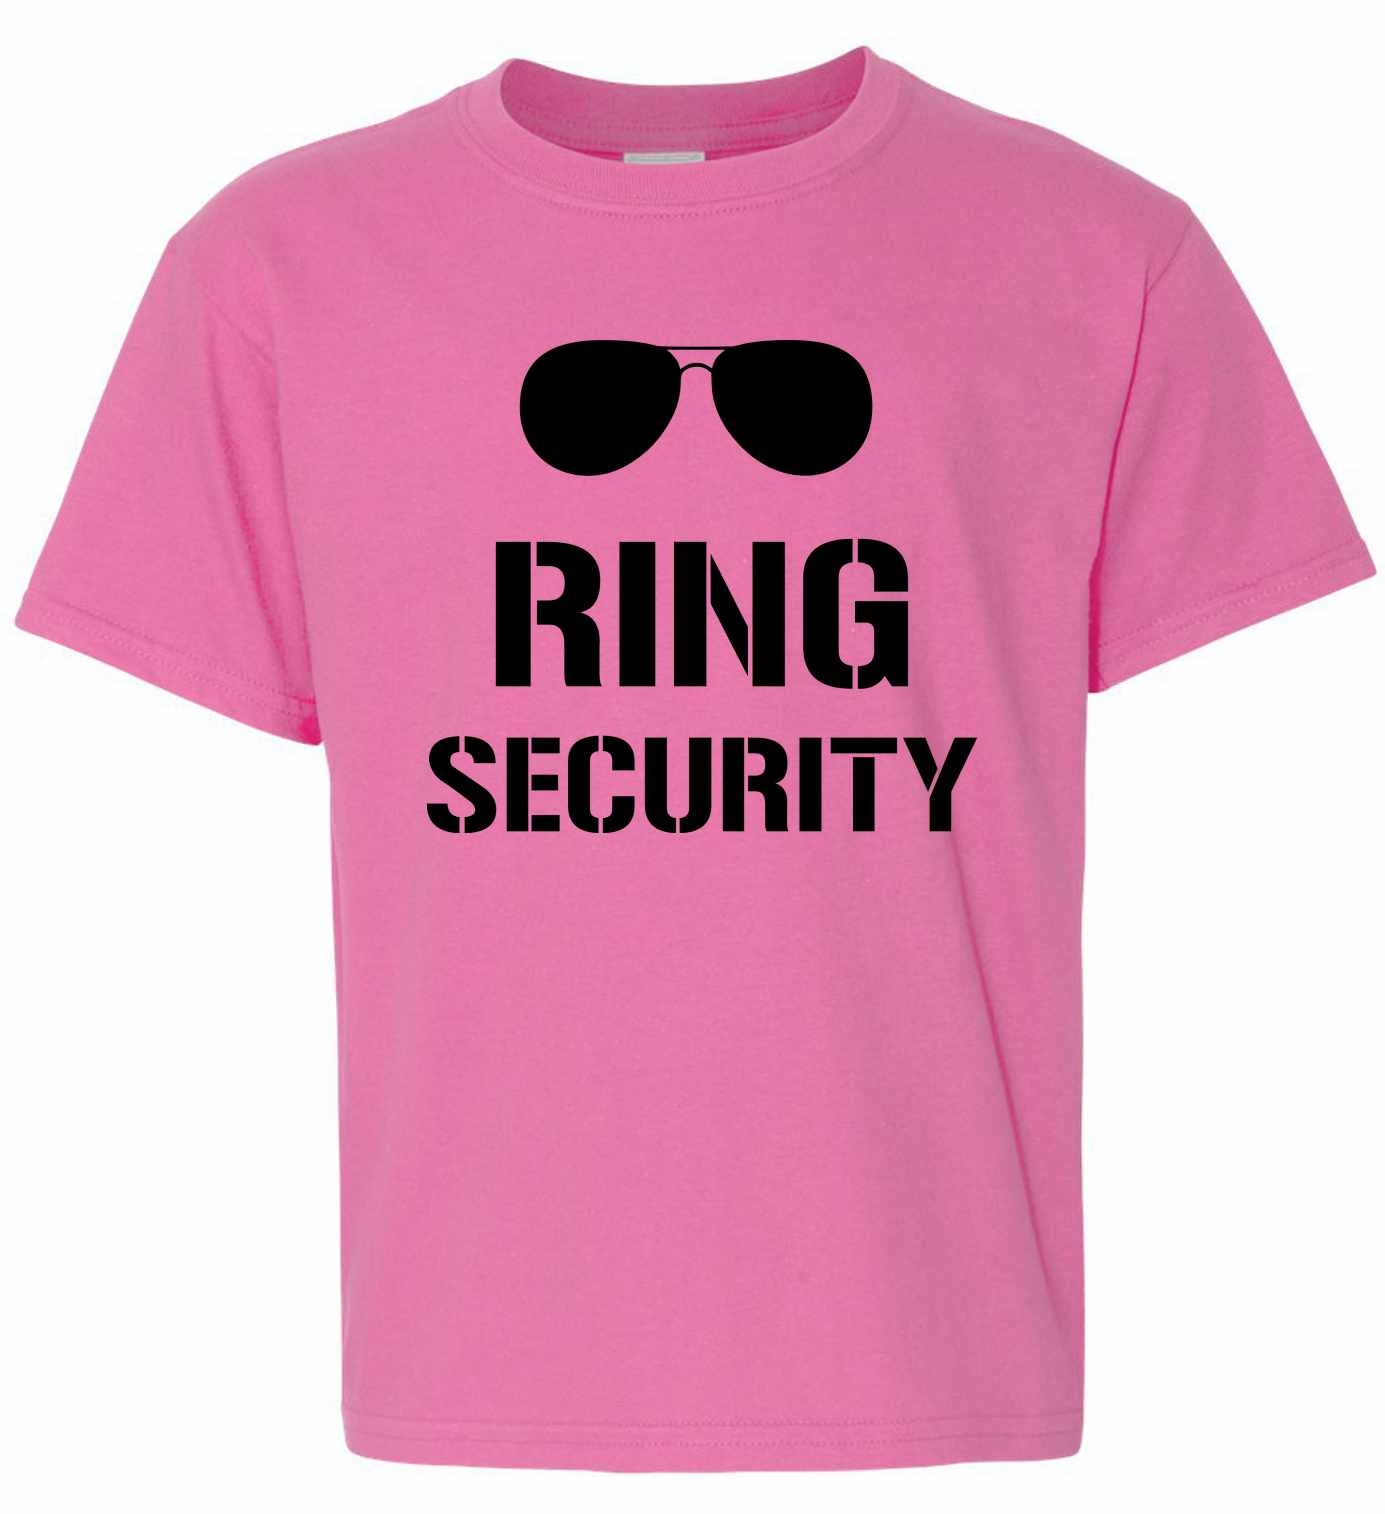 Ring Security on Kids T-Shirt (#1011-201)